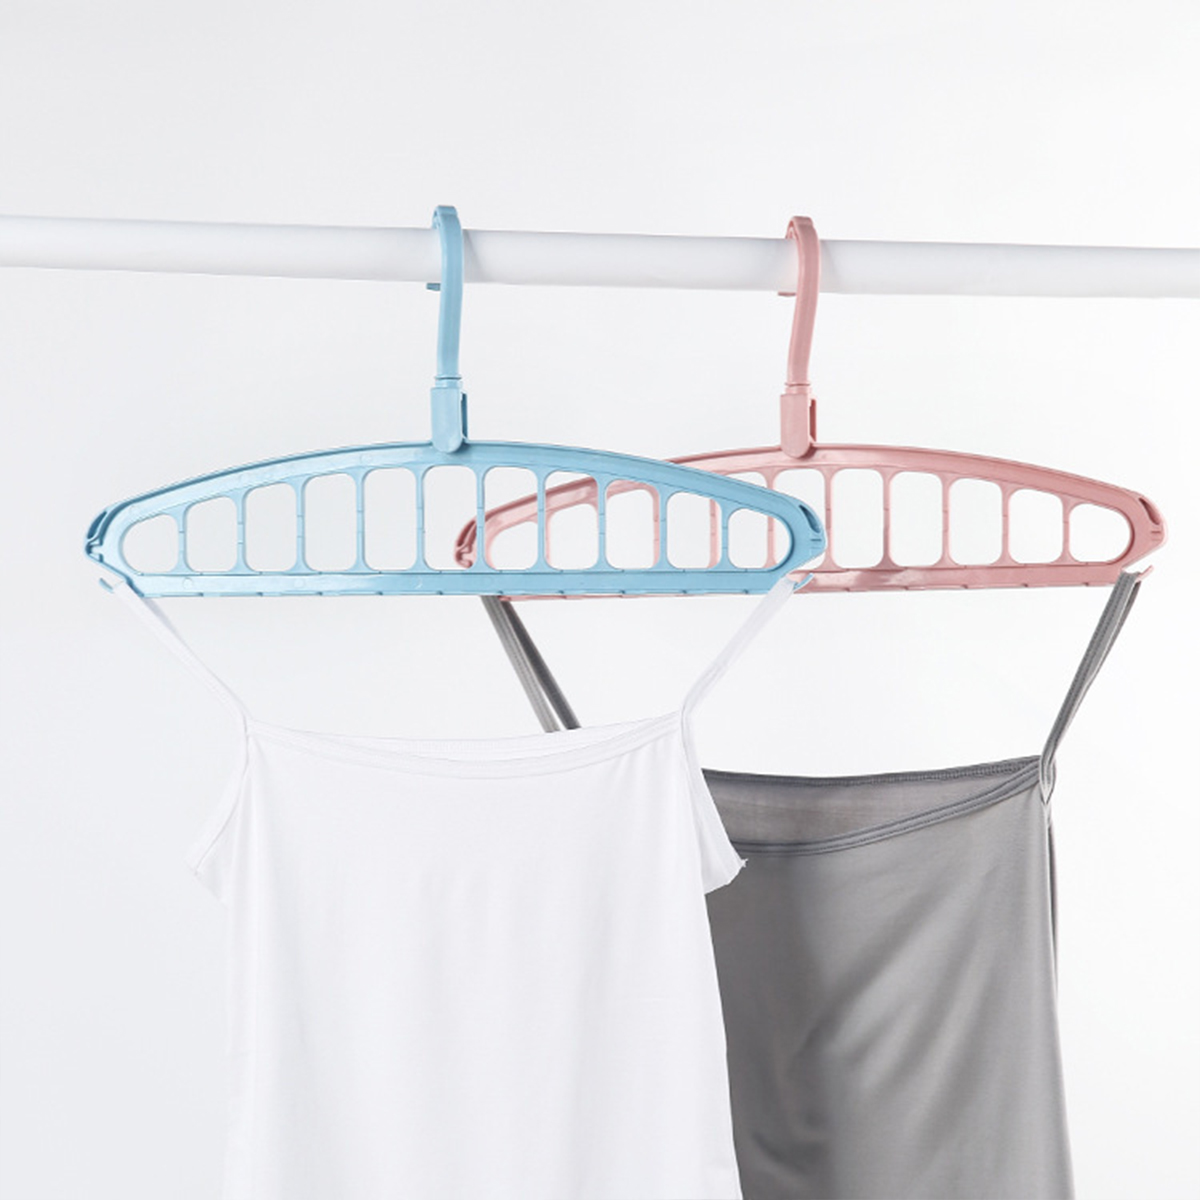 11-Holes-Multifunctional-Cloth-Hanger-Clothes-Organizer-Rack--Camping-Travel-1671505-5